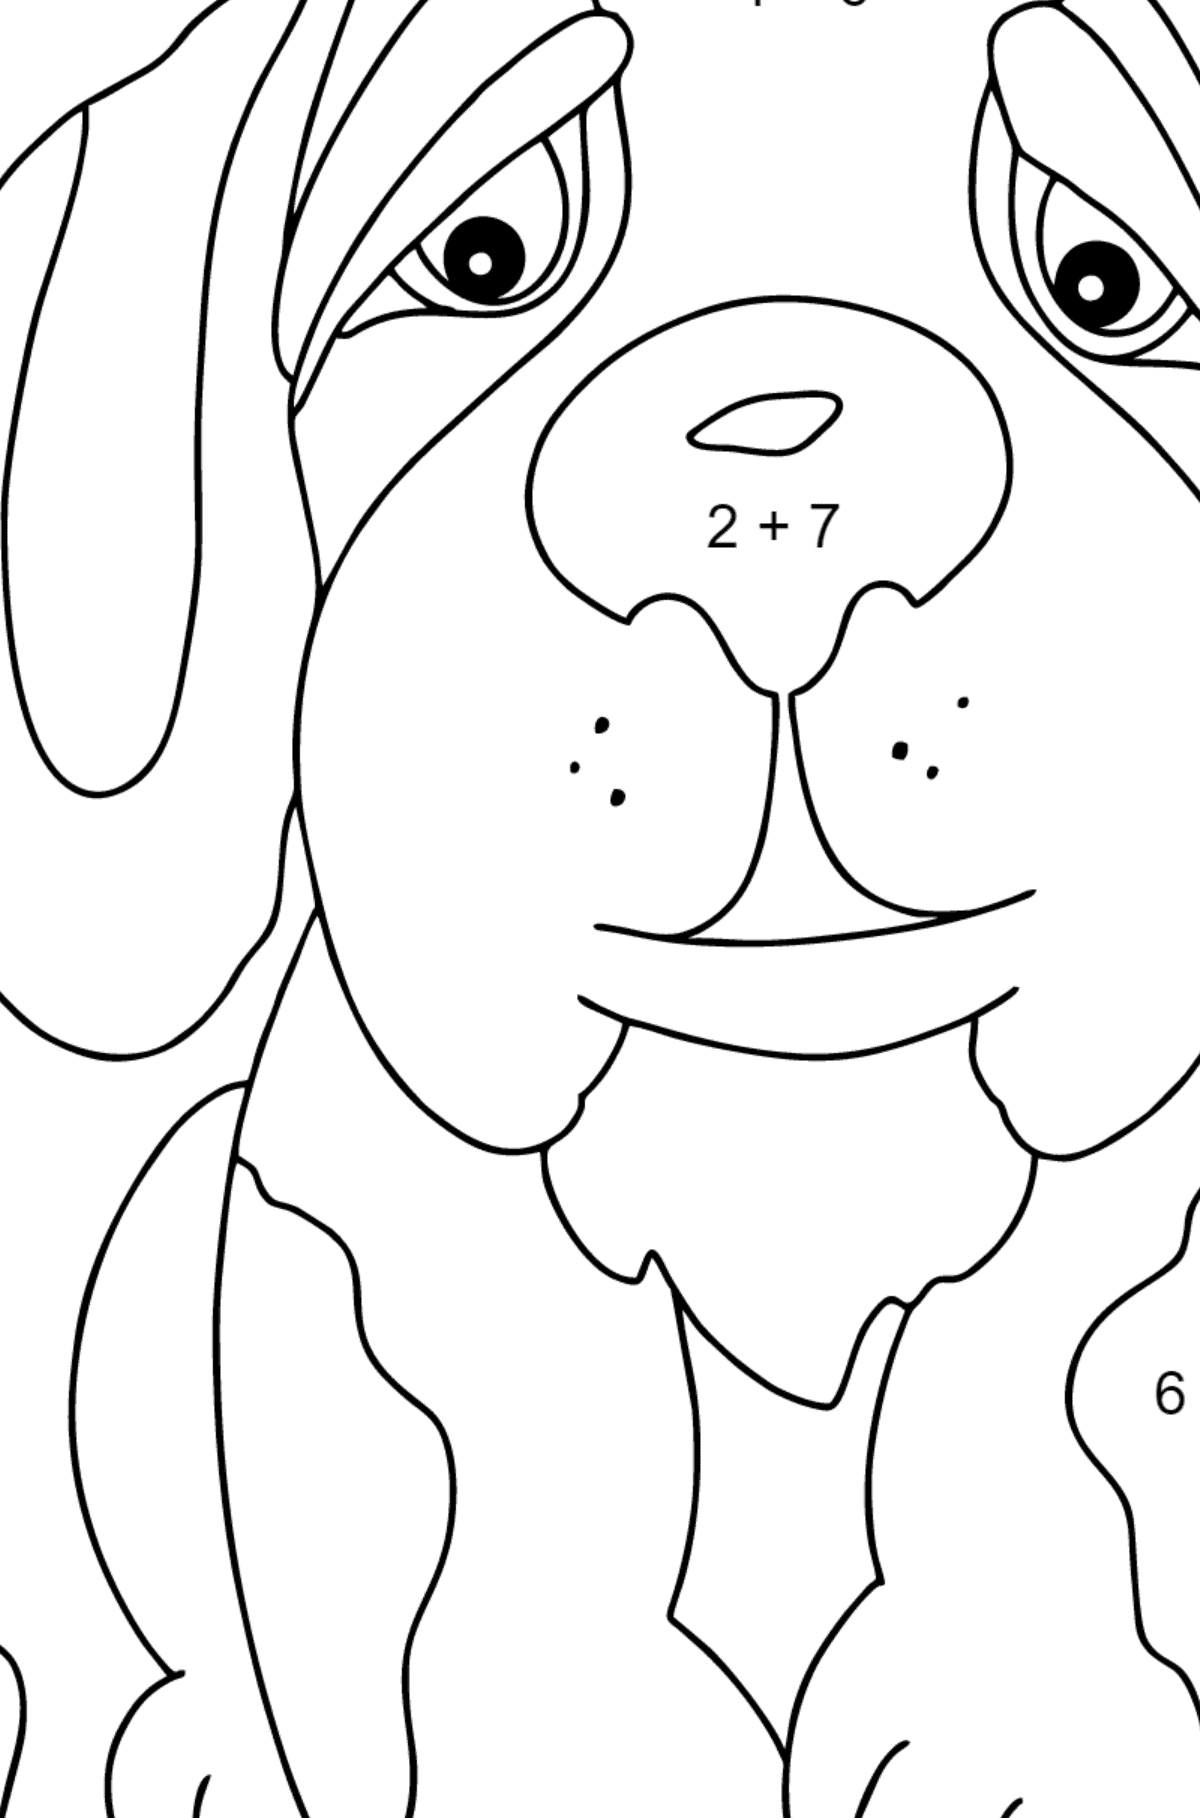 Coloring Page - A Dog is Looking Out a Butterfly for Children  - Color by Number Addition